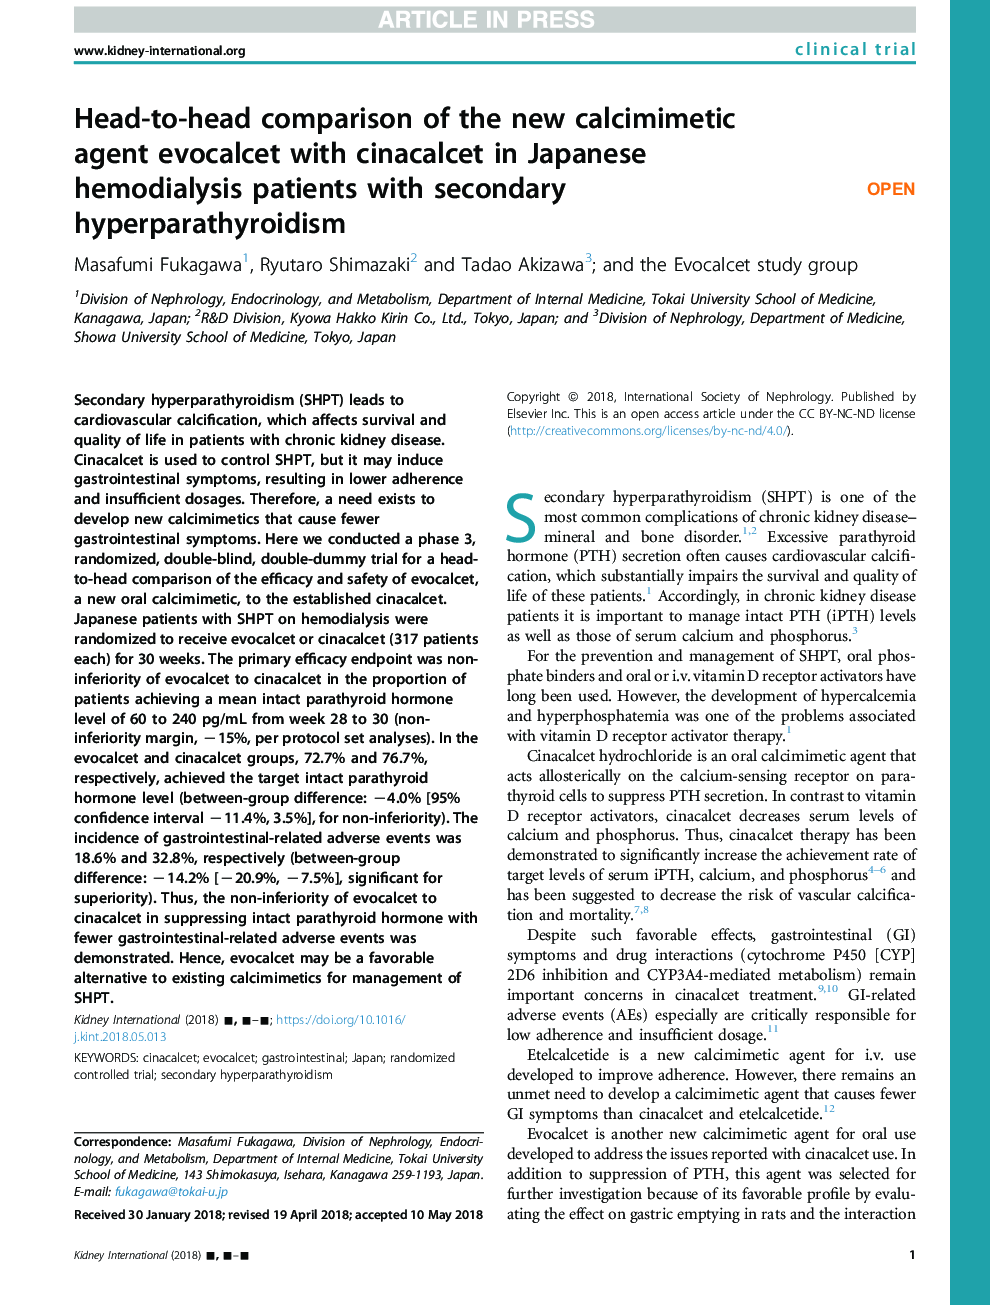 Head-to-head comparison of the new calcimimetic agent evocalcet with cinacalcet in Japanese hemodialysis patients with secondary hyperparathyroidism